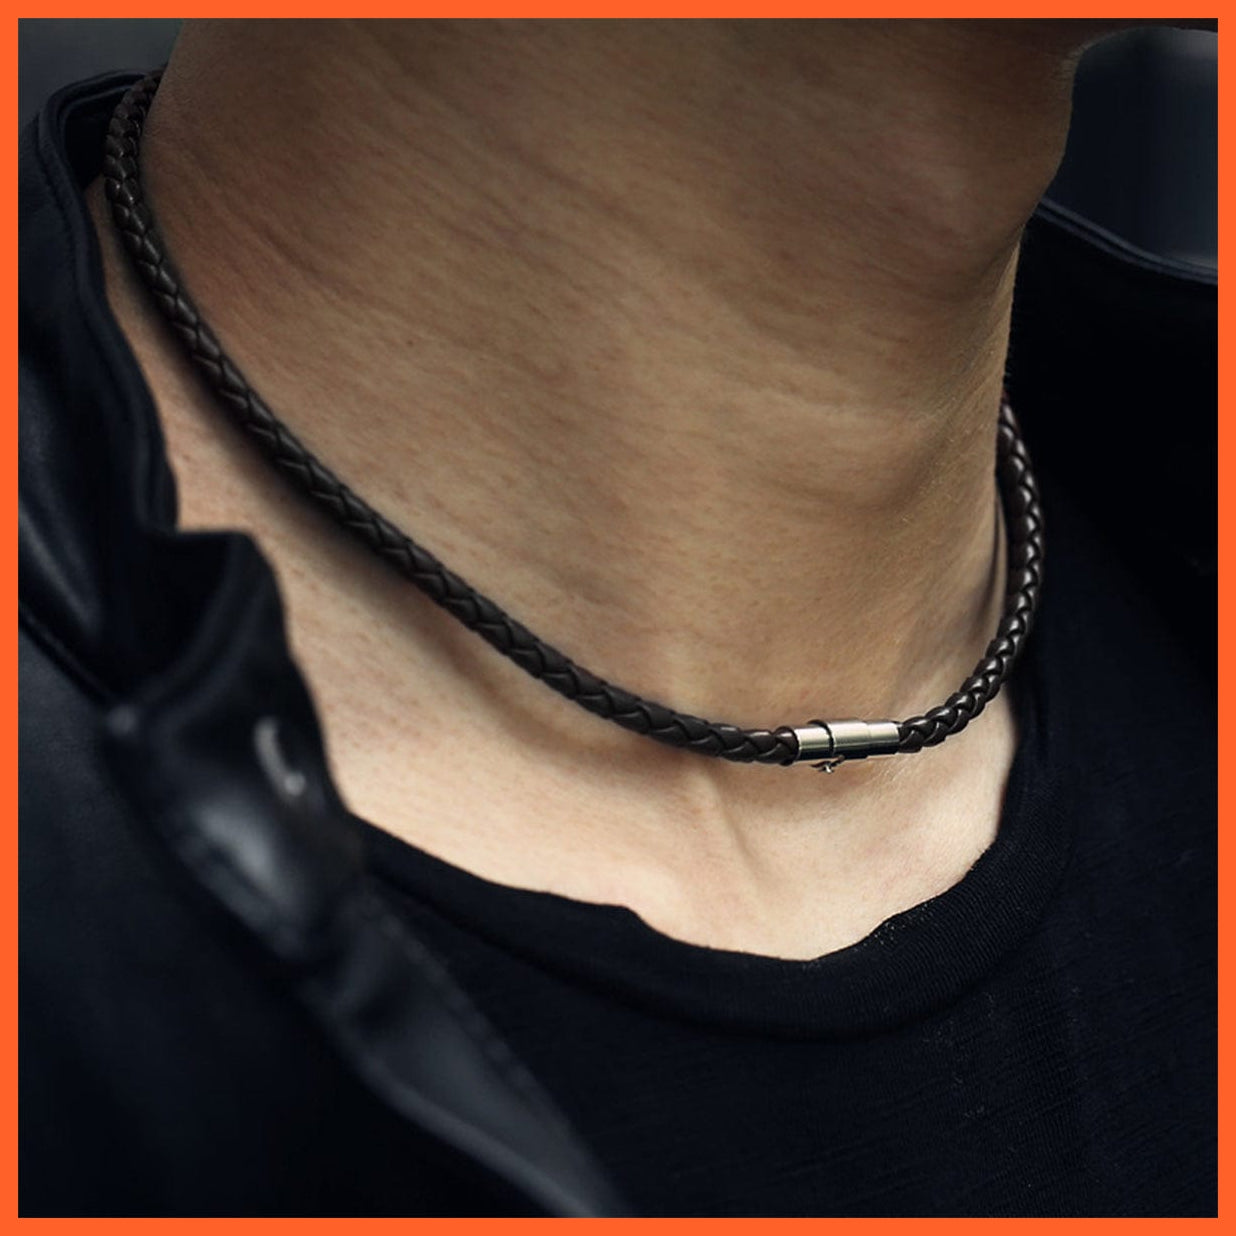 whatagift.com.au Pendant Necklace Classic Leather Necklace Choker Black Brown Braided Rope Chain Jewelry Gifts